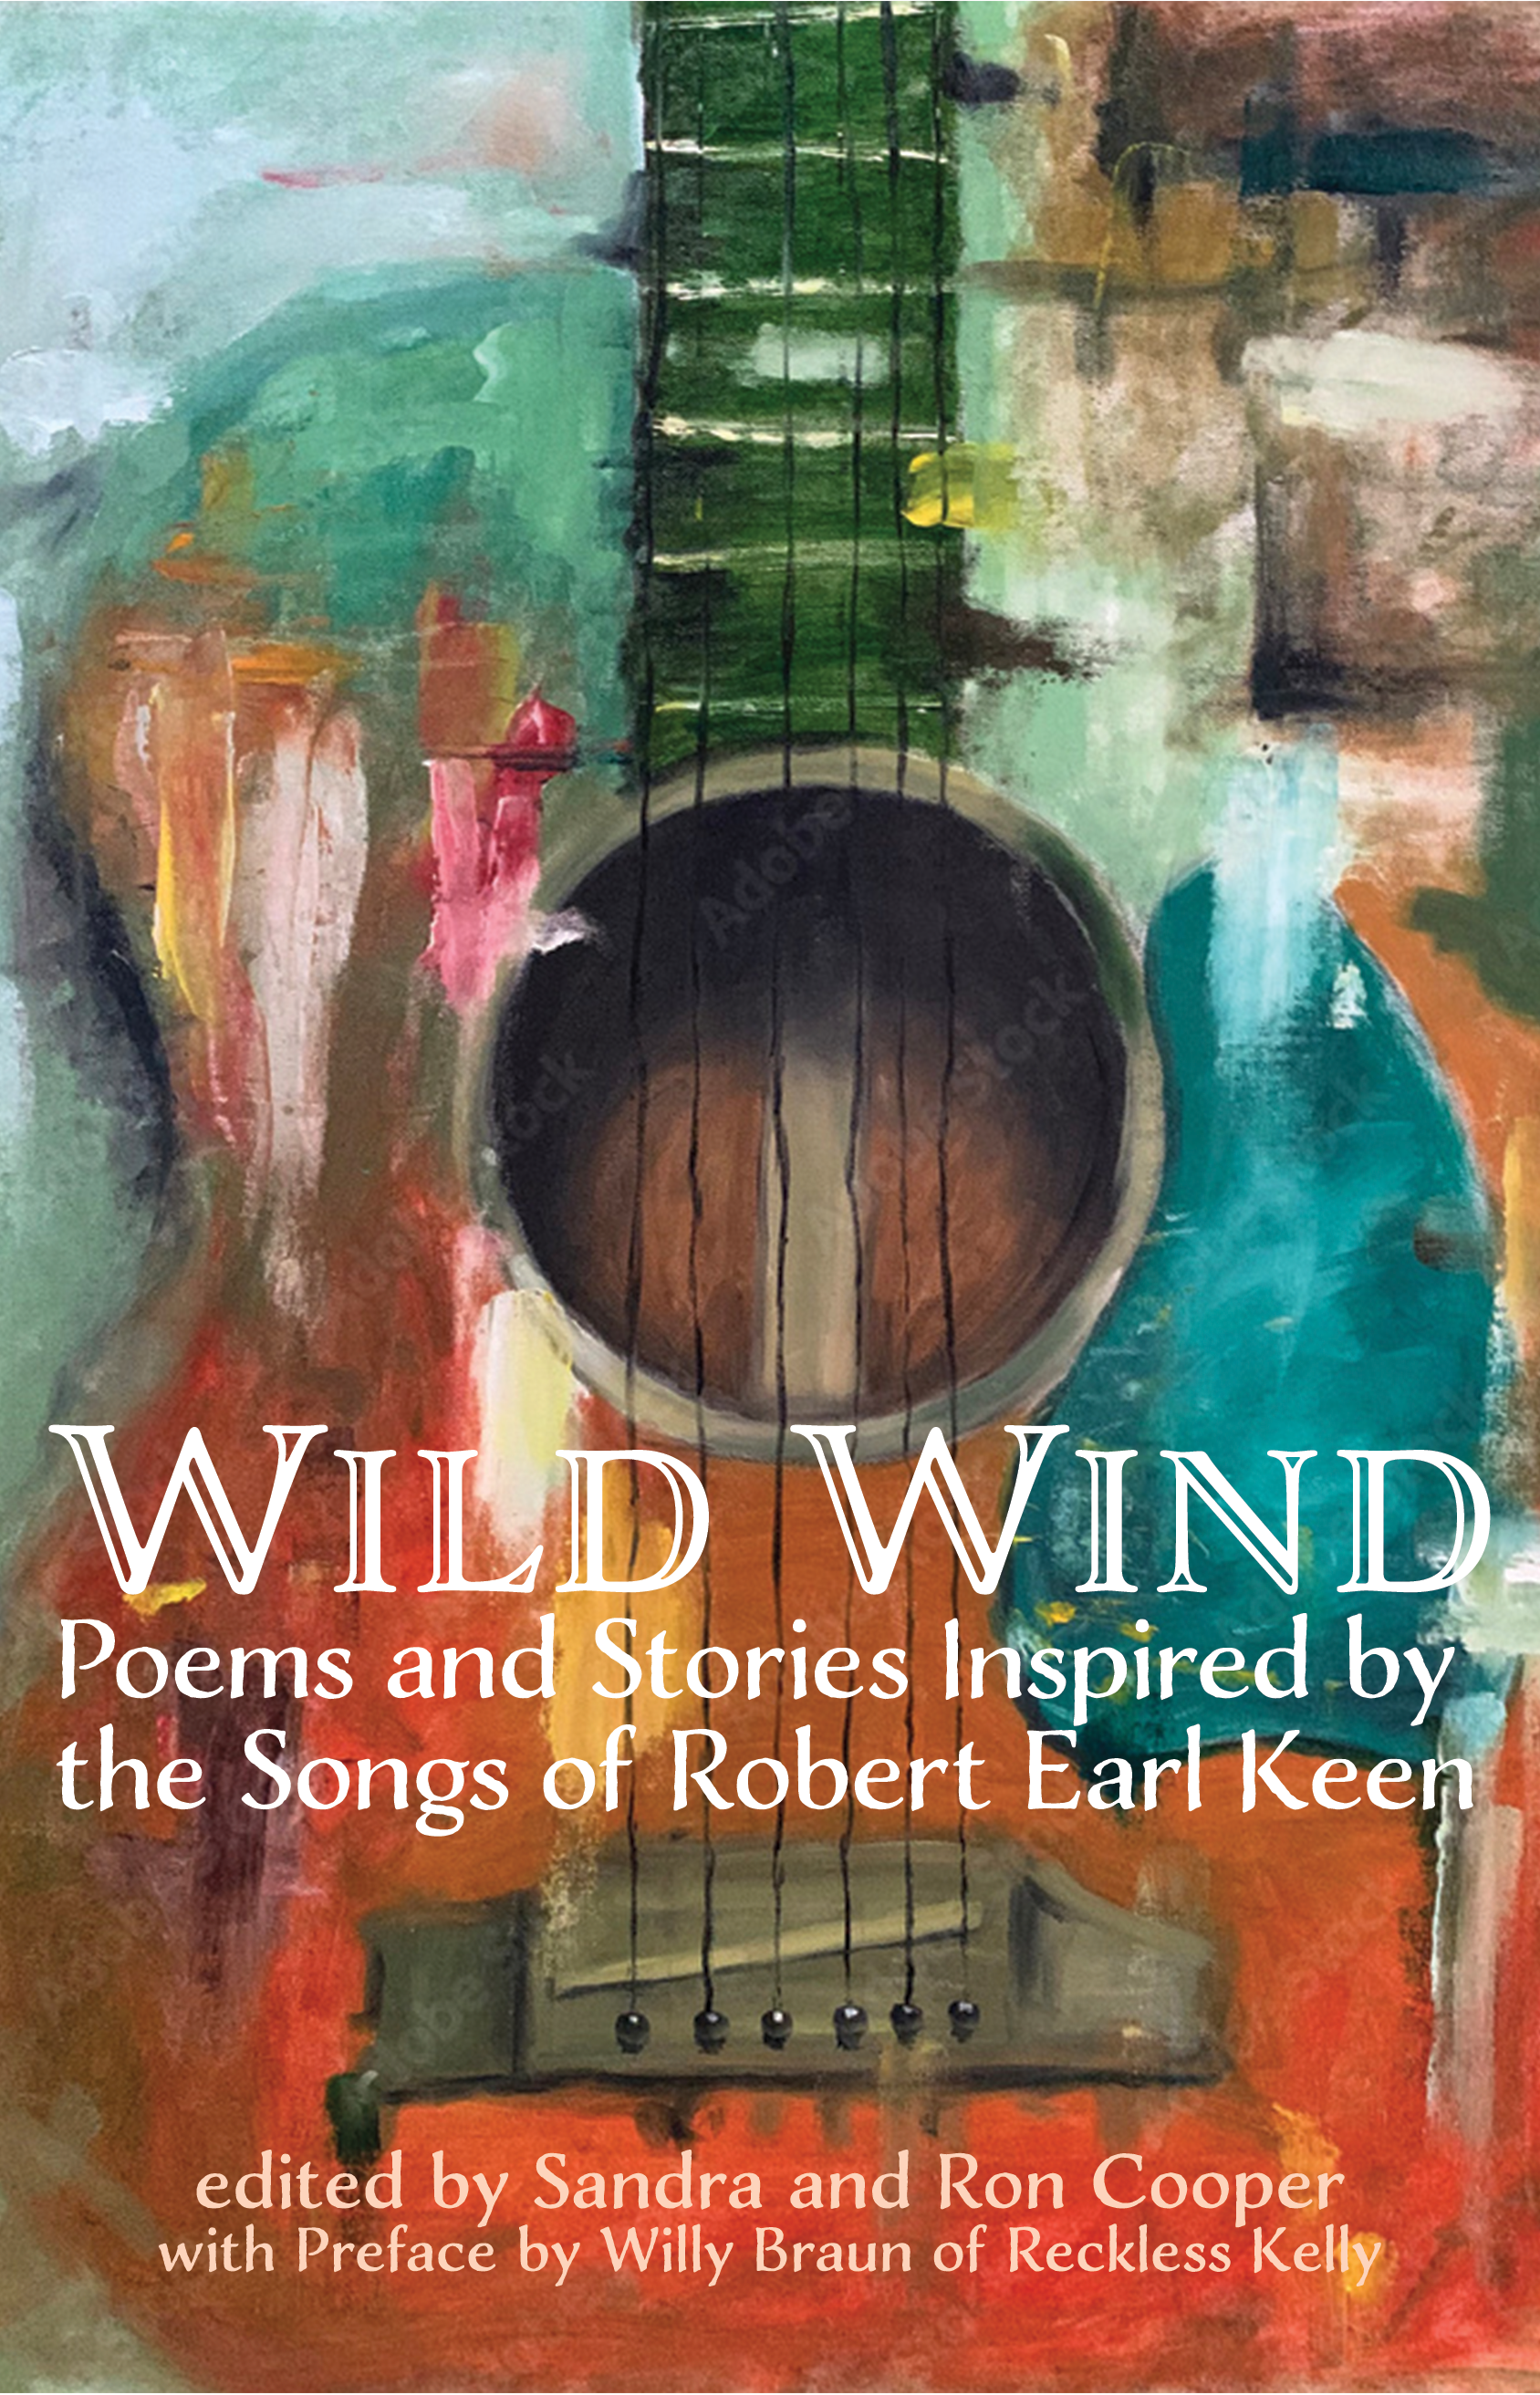 Cover for Wild Wind:Poems and Stories Inspired by the Songs of Robert Earl Keen edited by Sandra and Ron cooper with a preface by Willy Braun of Reckless Kelly. The cover shows an abstract, multi-colored painting of a guitar with white lettering superimposed over it.